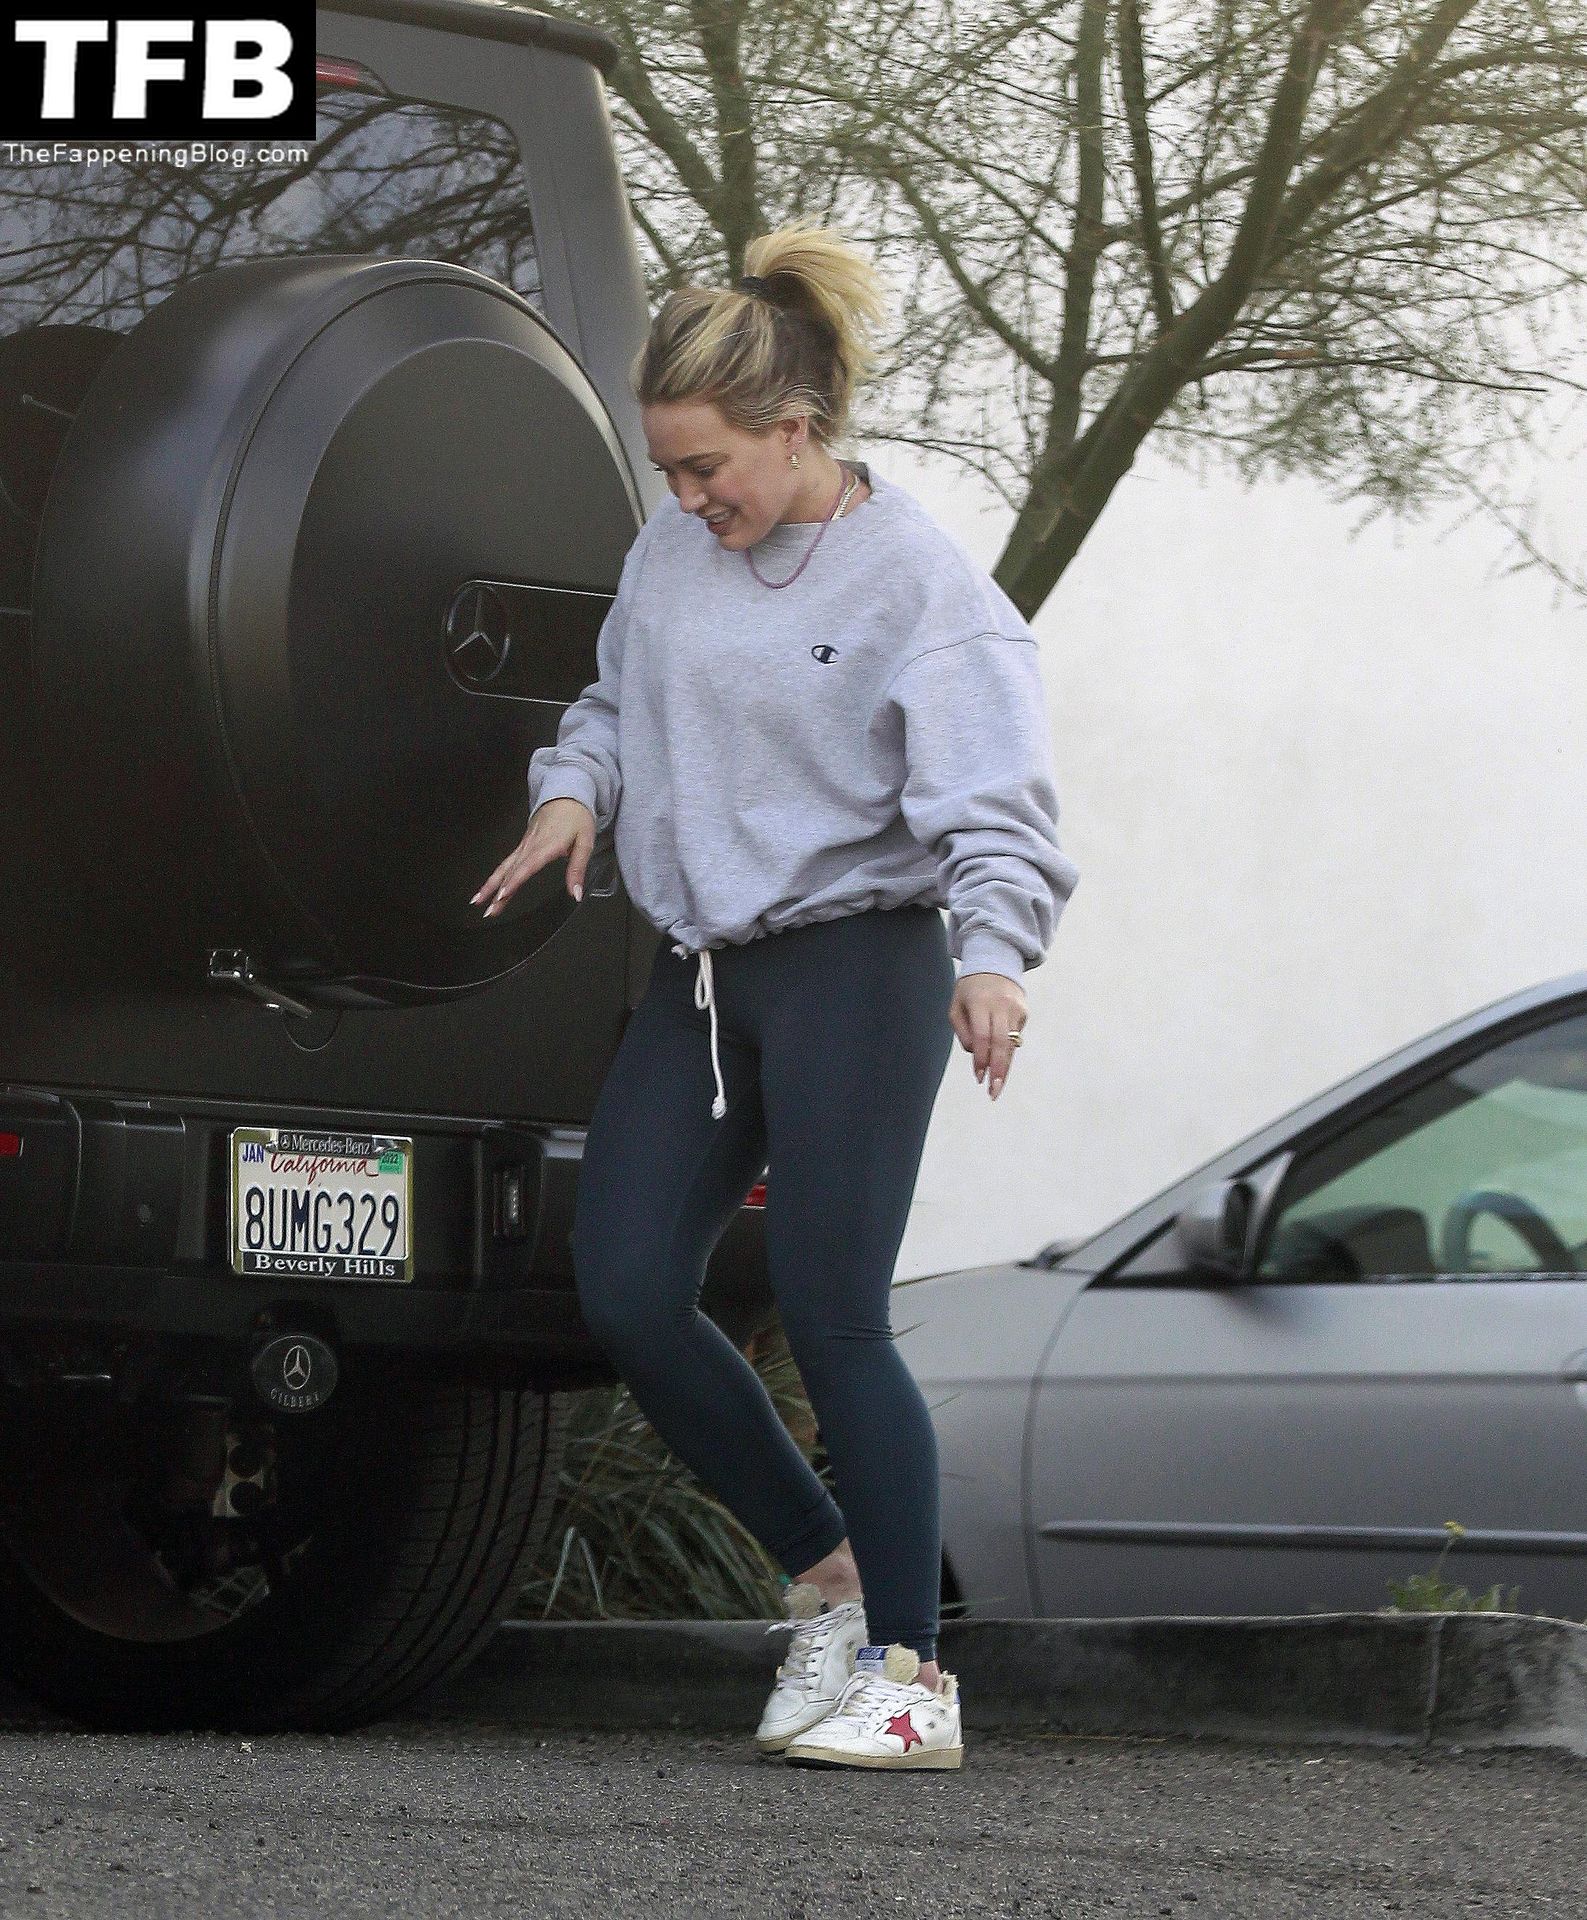 Hilary-Duff-shows-off-impressive-gym-results-in-a-pair-of-skintight-leggings-during-LA-errand-run...-one-day-after-hosting-quaint-Thanksgiving-gathering-at-her-home-The-Fappening-Blog-12.jpg